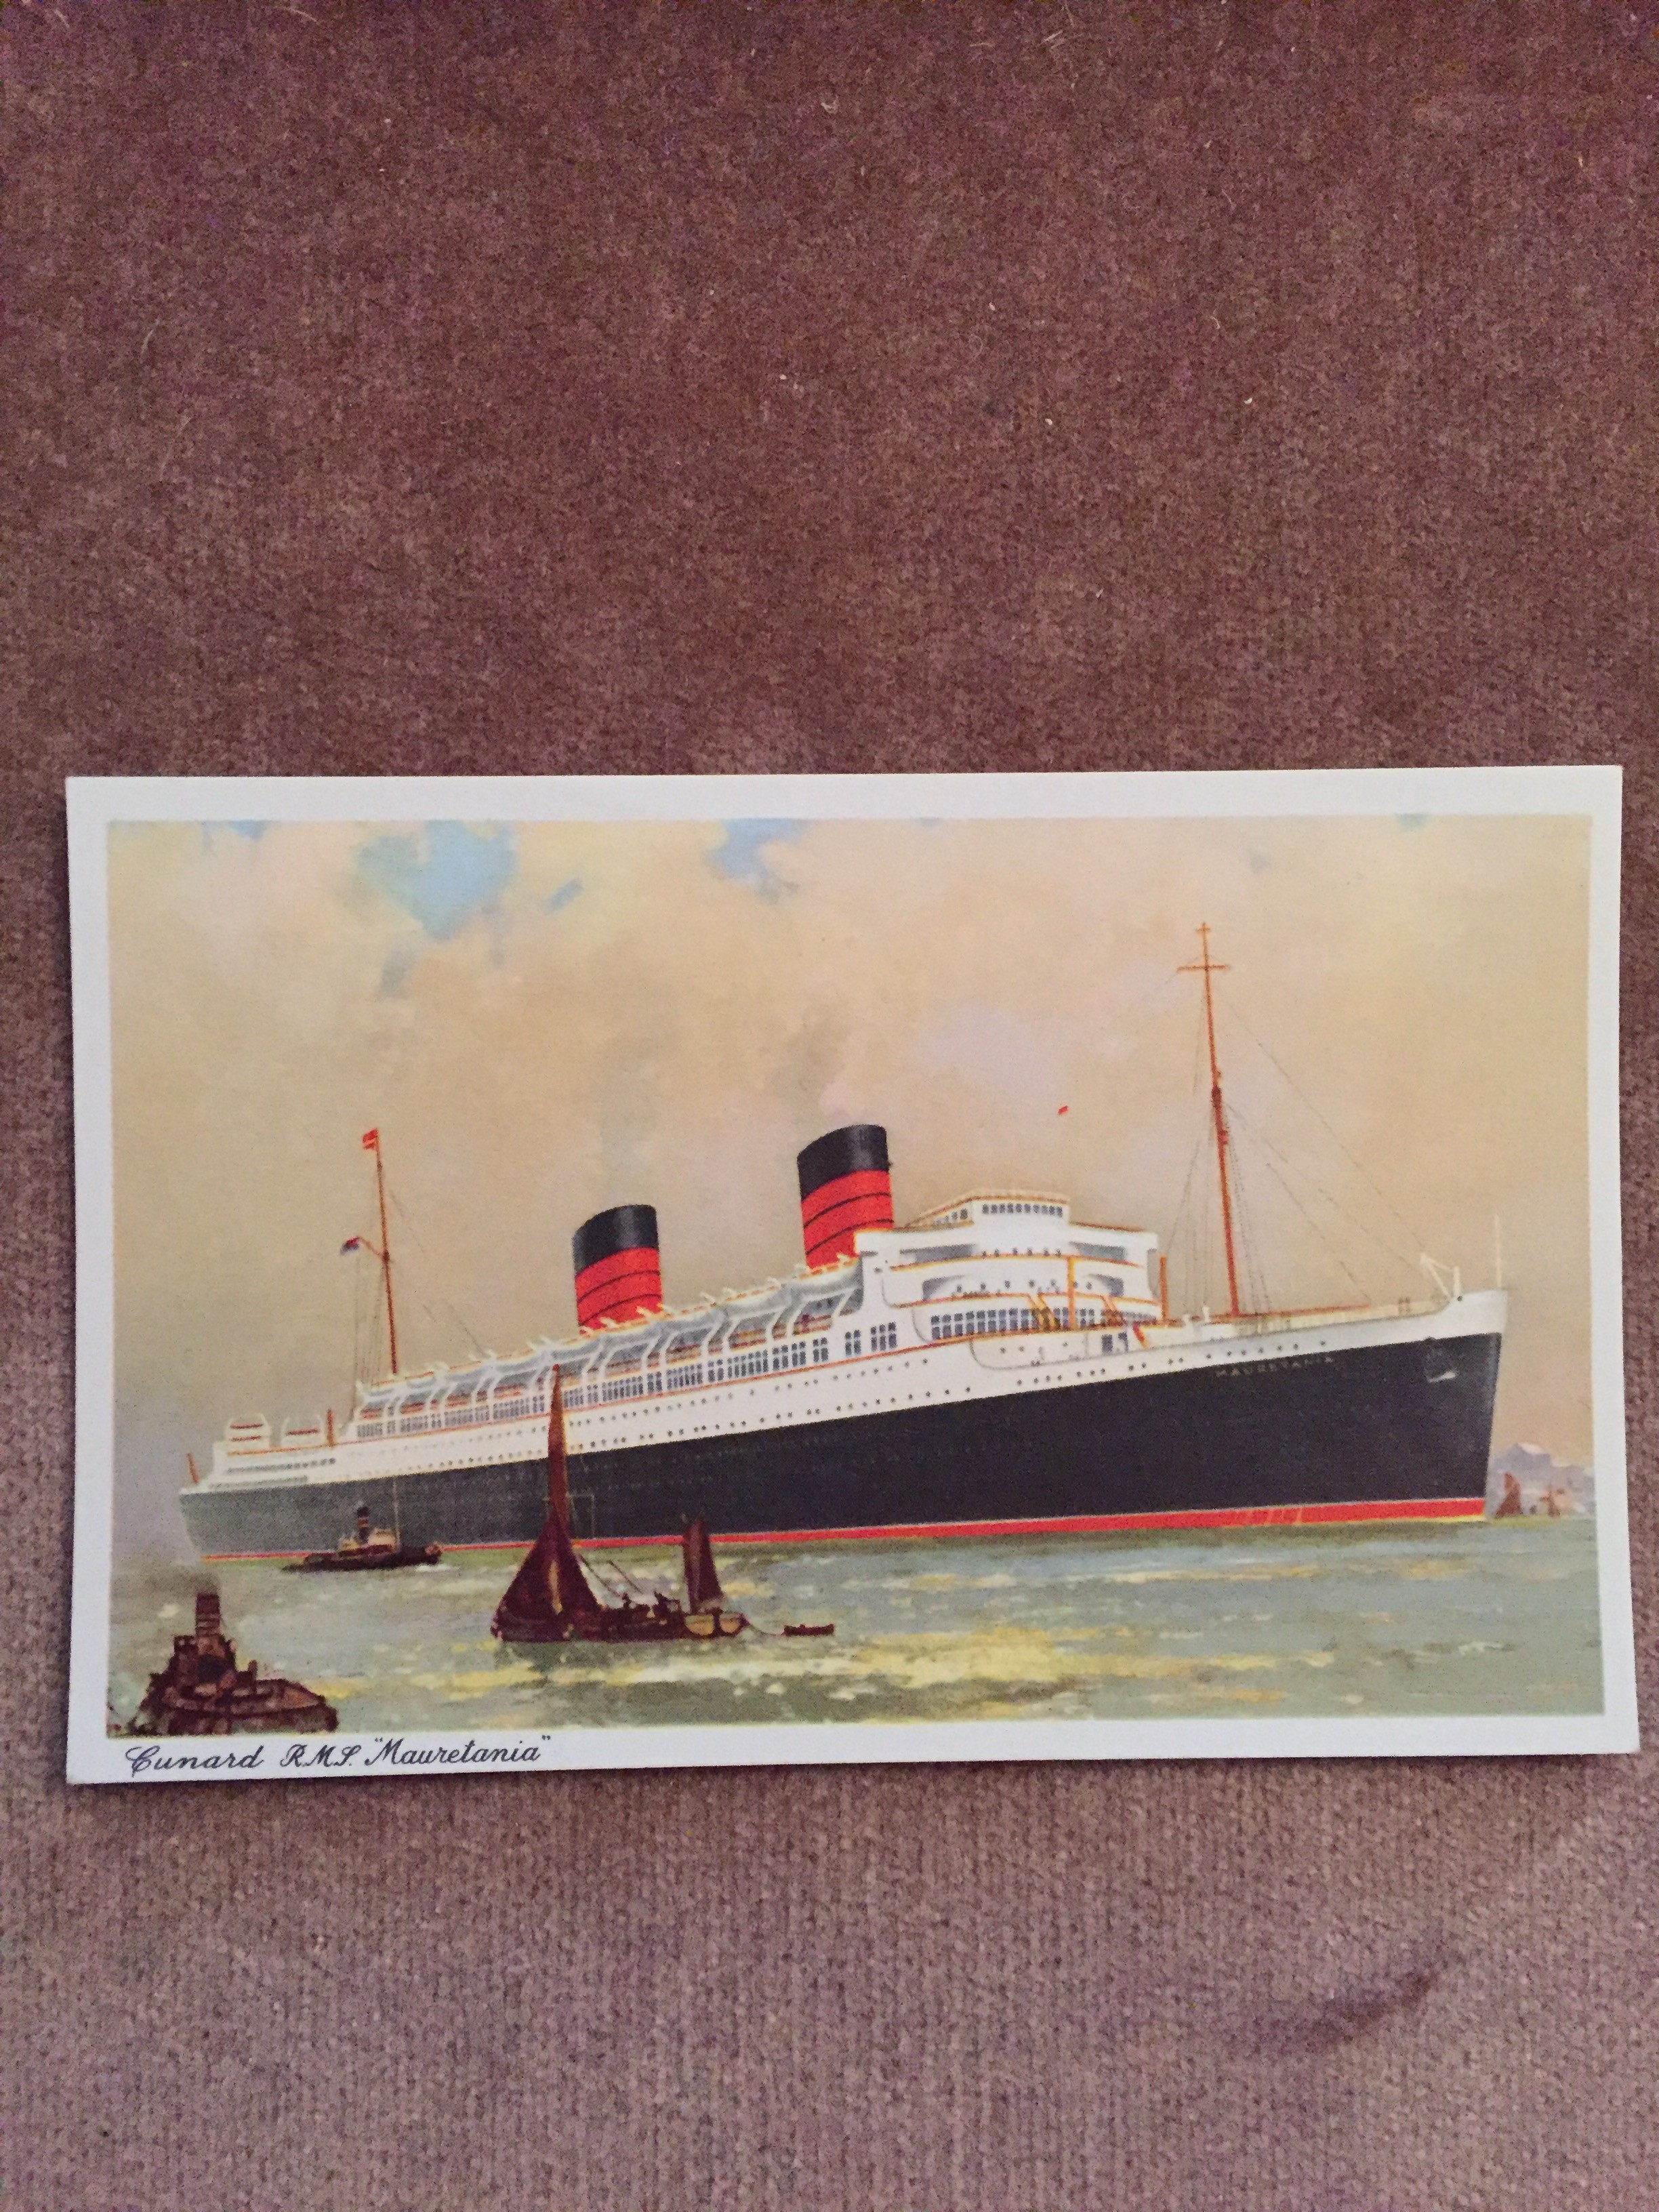 UNUSED COLOUR POSTCARD FROM THE OLD CUNARD WHITE STAR LINE VESSEL THE MAURETANIA